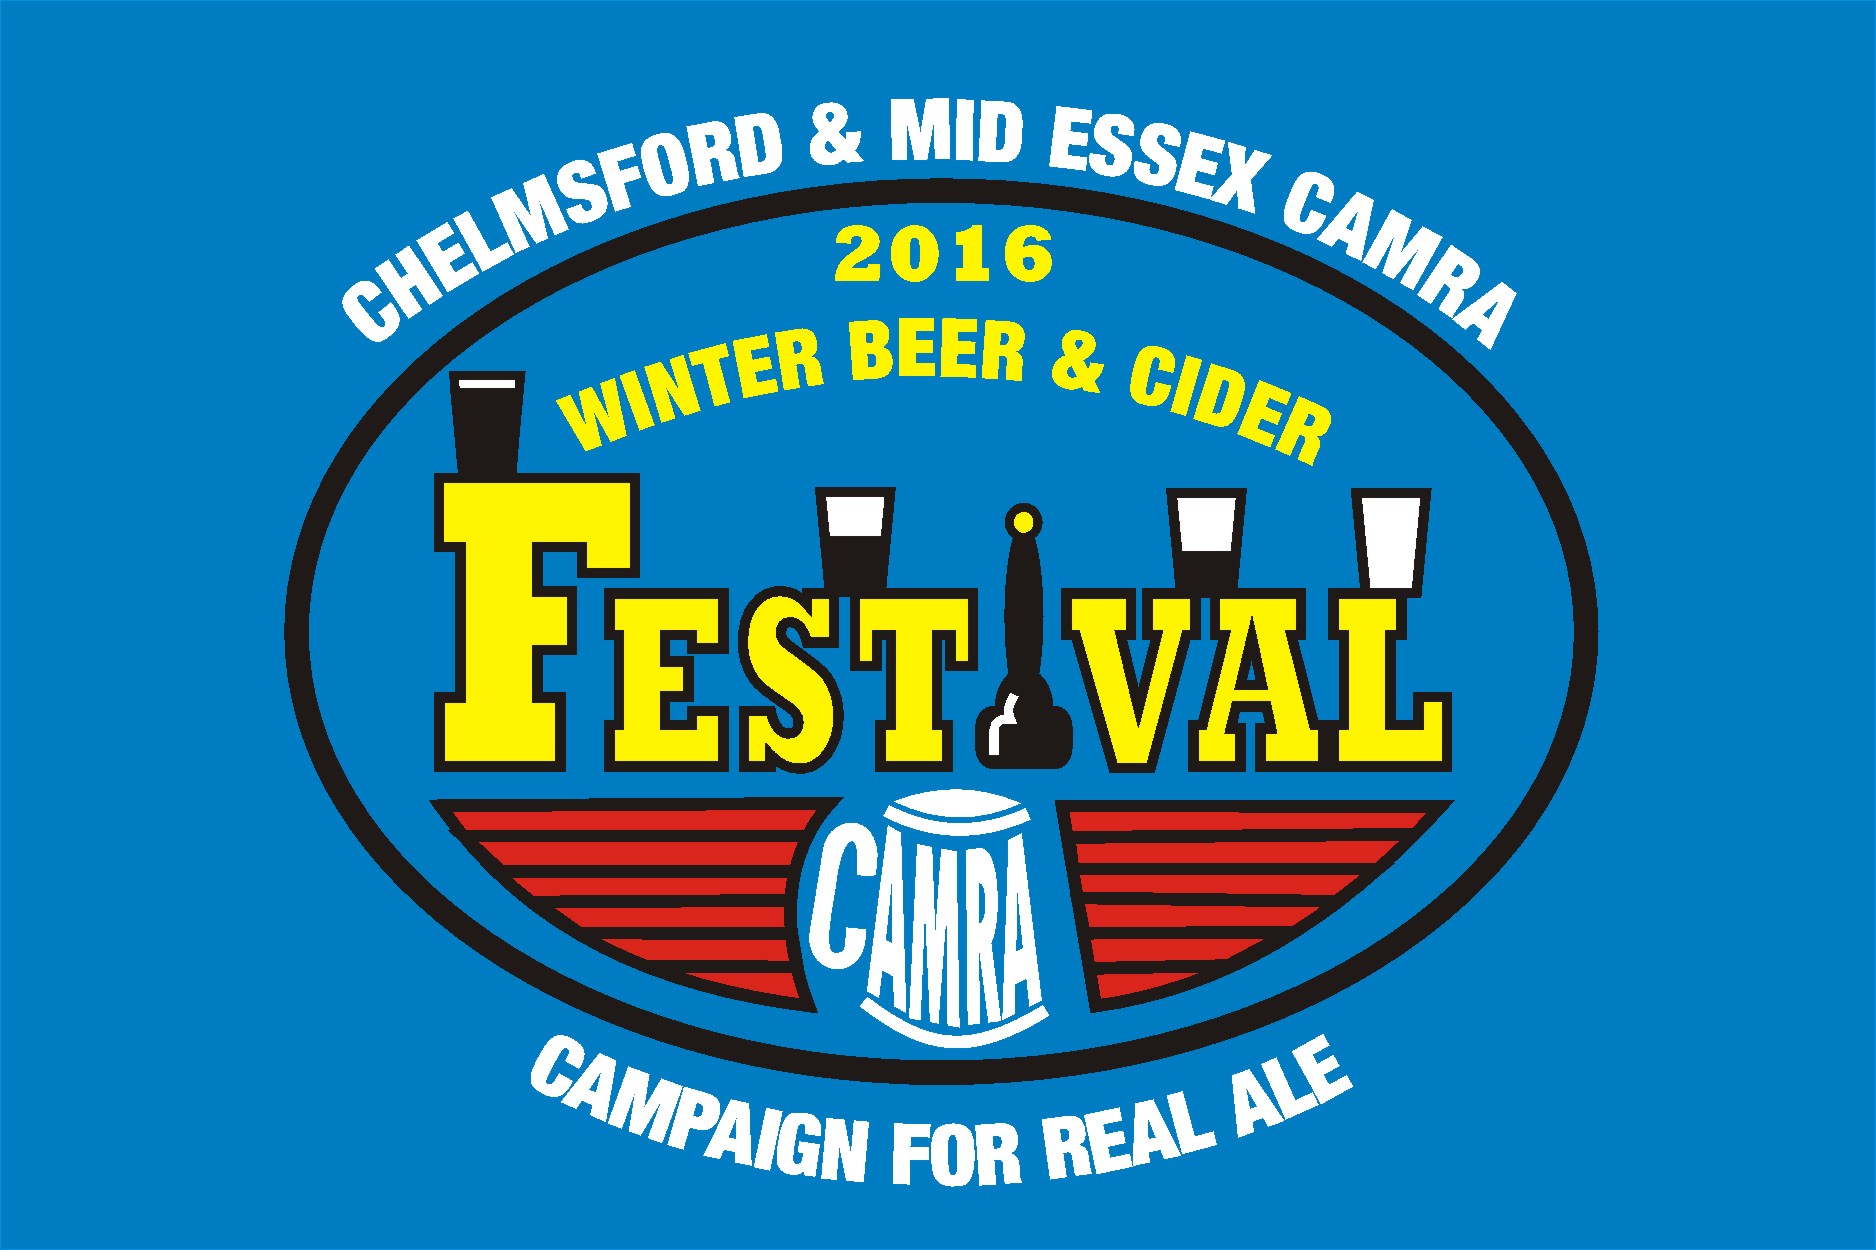 17th Chelmsford Winter Beer & Cider Event 